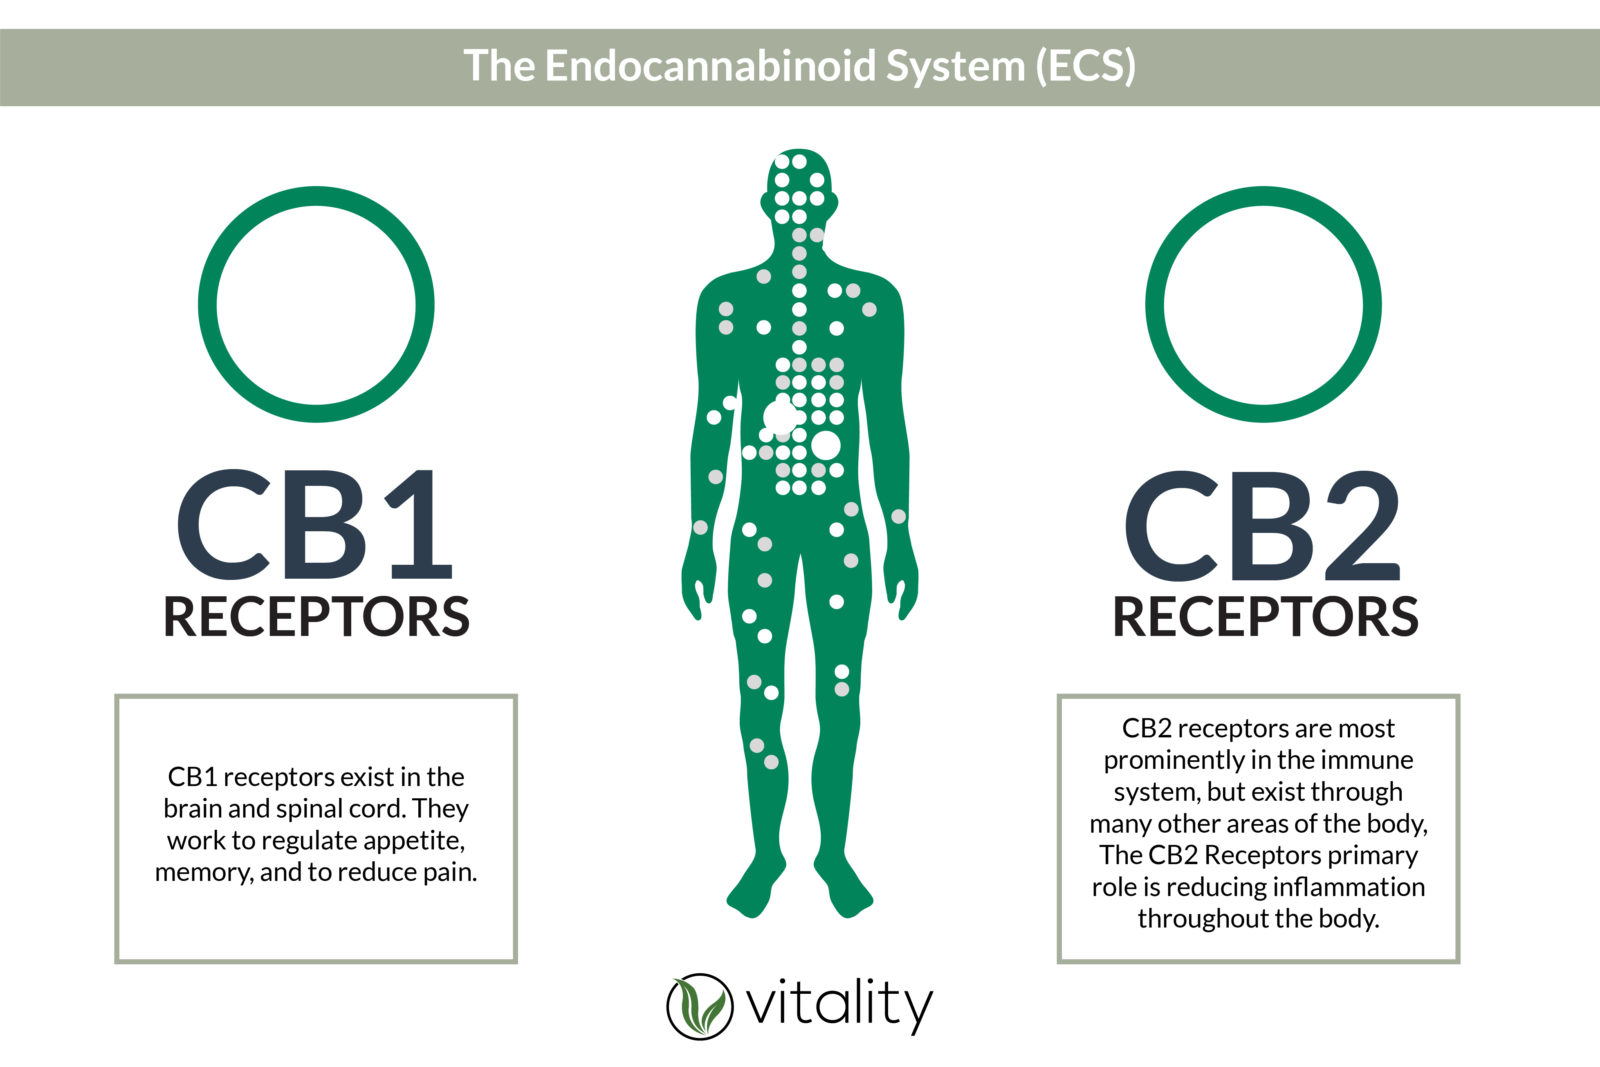 Cb1 and CB2 Receptors in the Endocannabinoid System